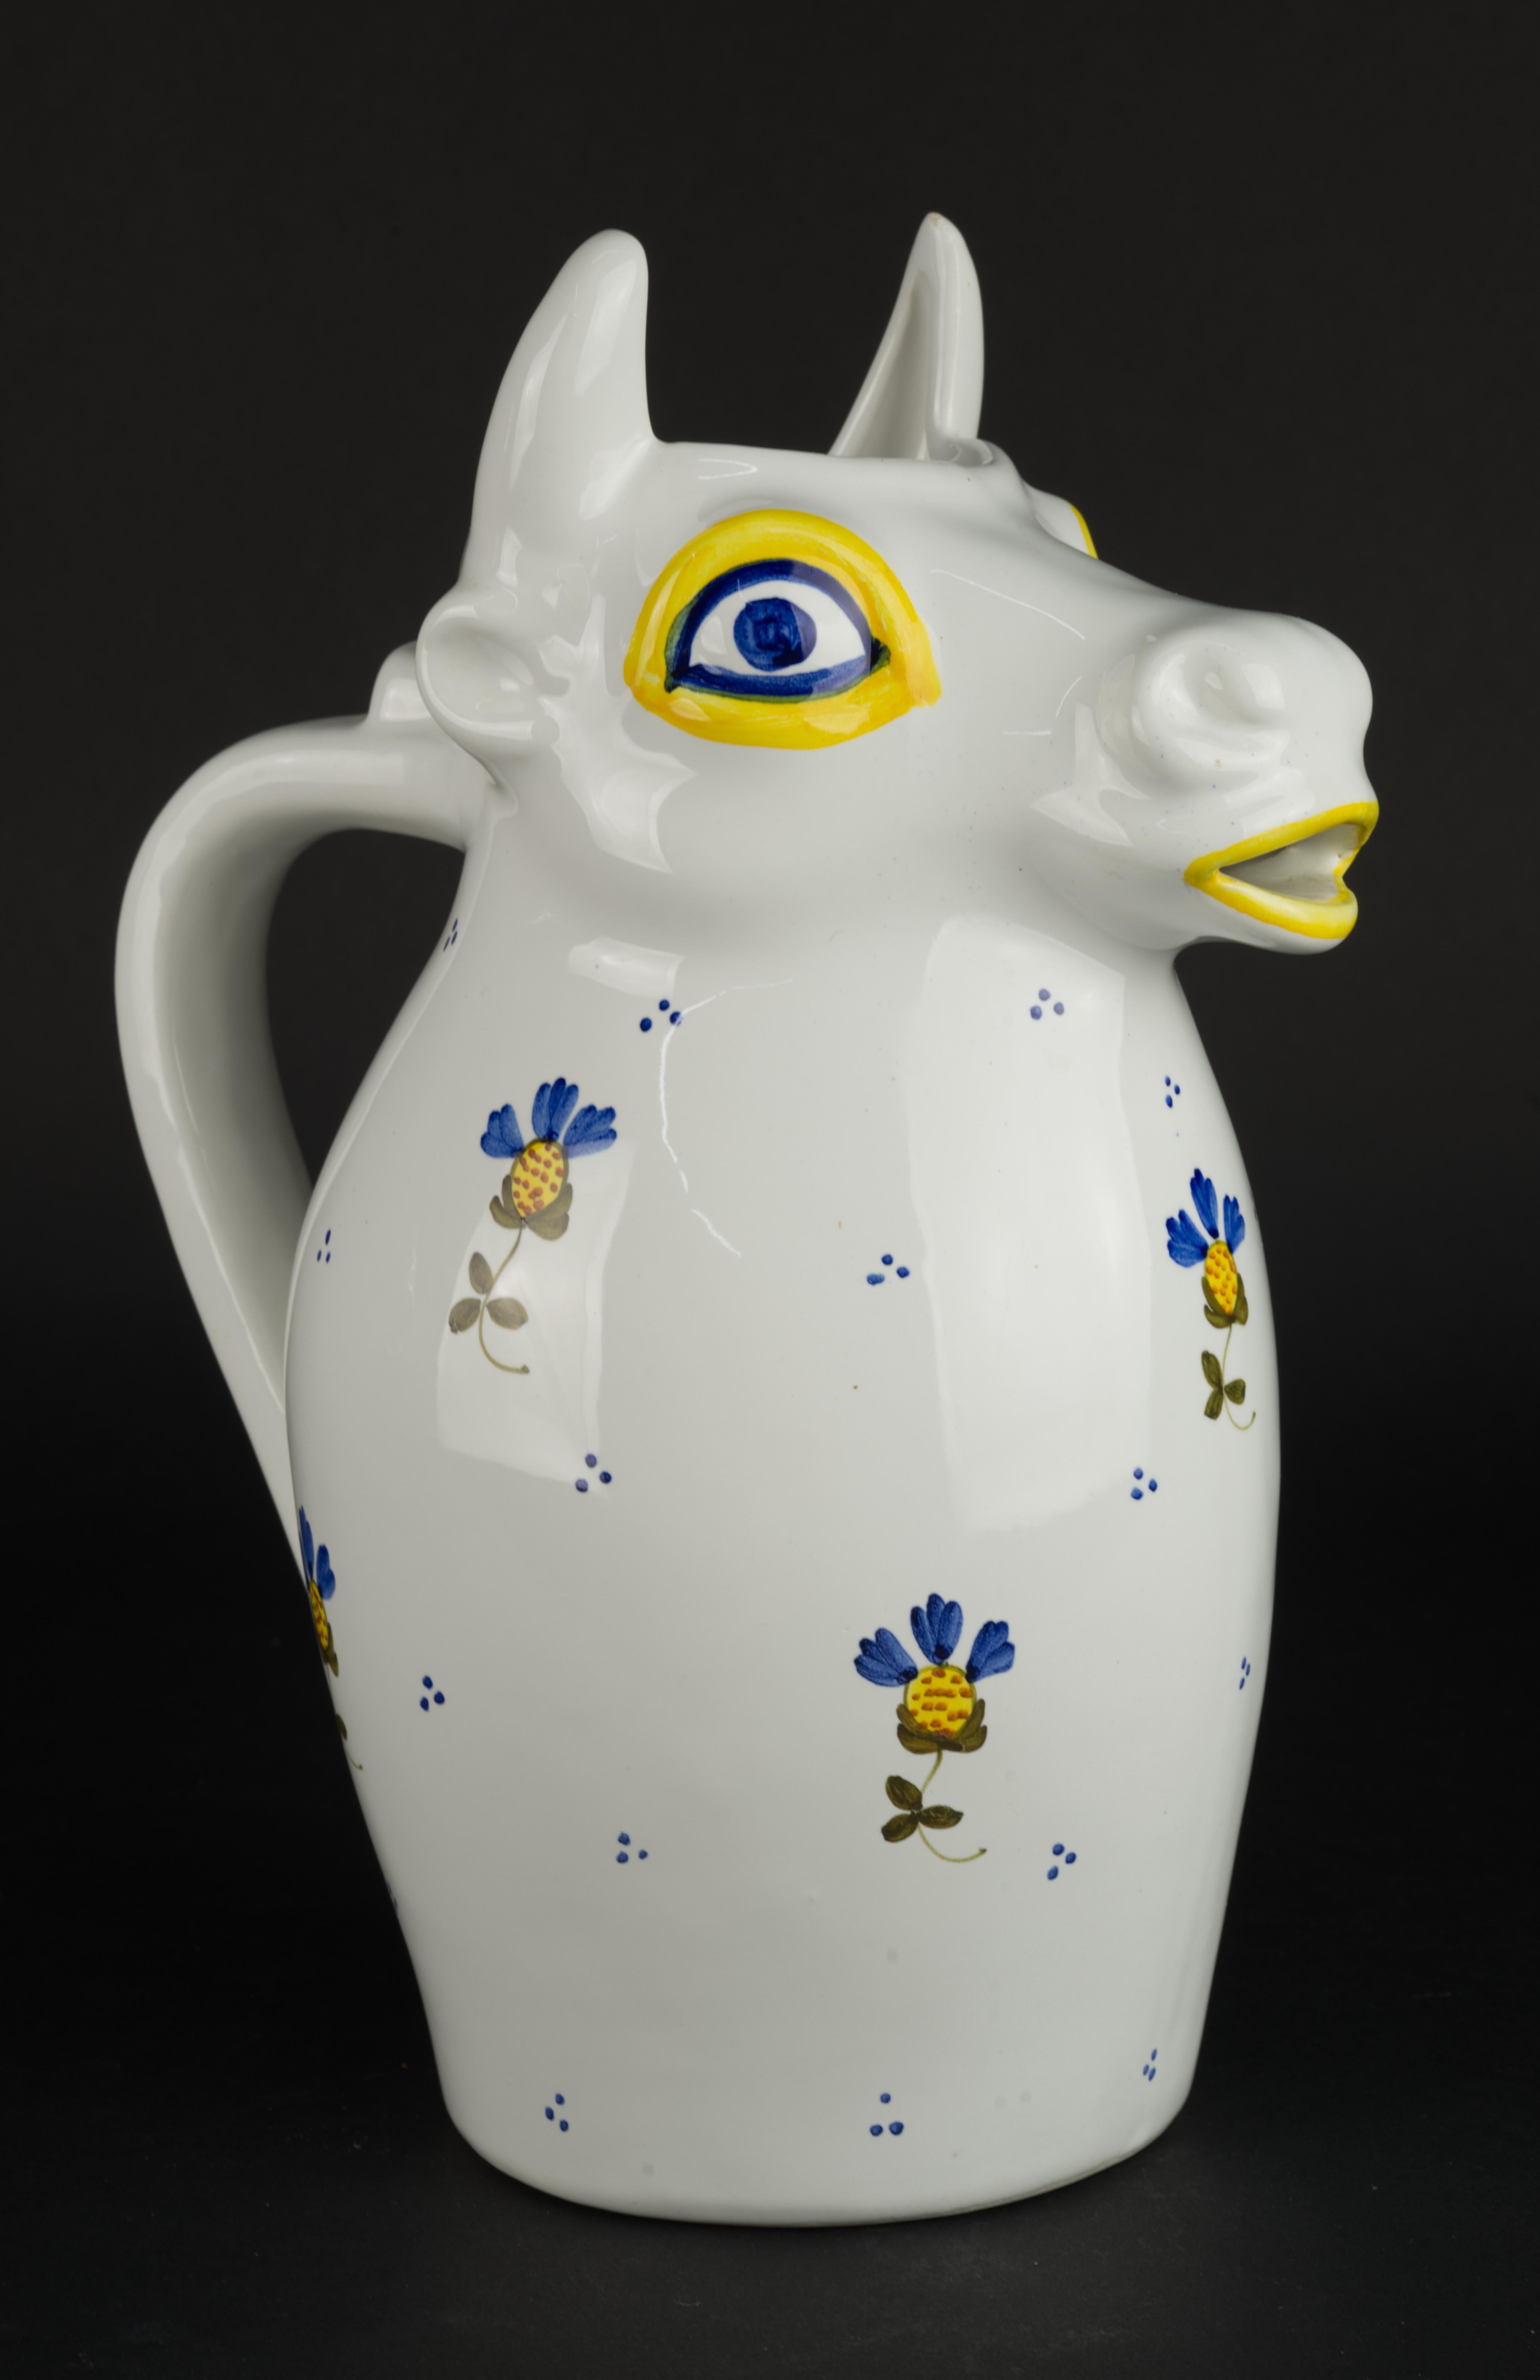  Unusual and playful majolica pitcher has its top part shaped in form of a bull's head with bull's mouth forming the spout. It is decorated with hand painted traditional Italian flower designs in blue and yellow and blue dots on bright white glaze.